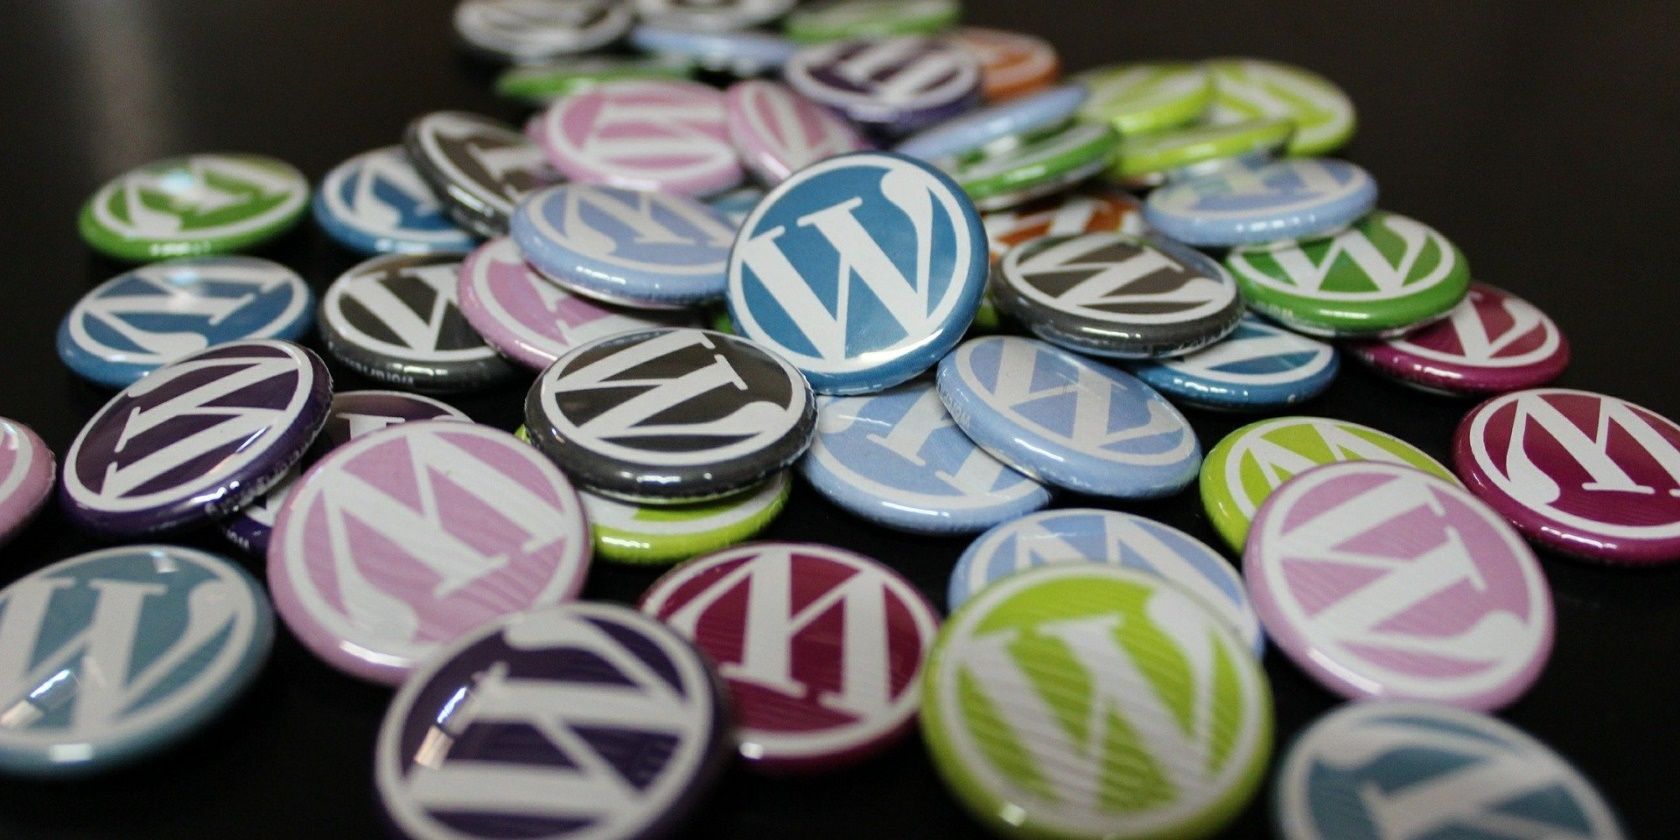 WordPress staging sites for testing